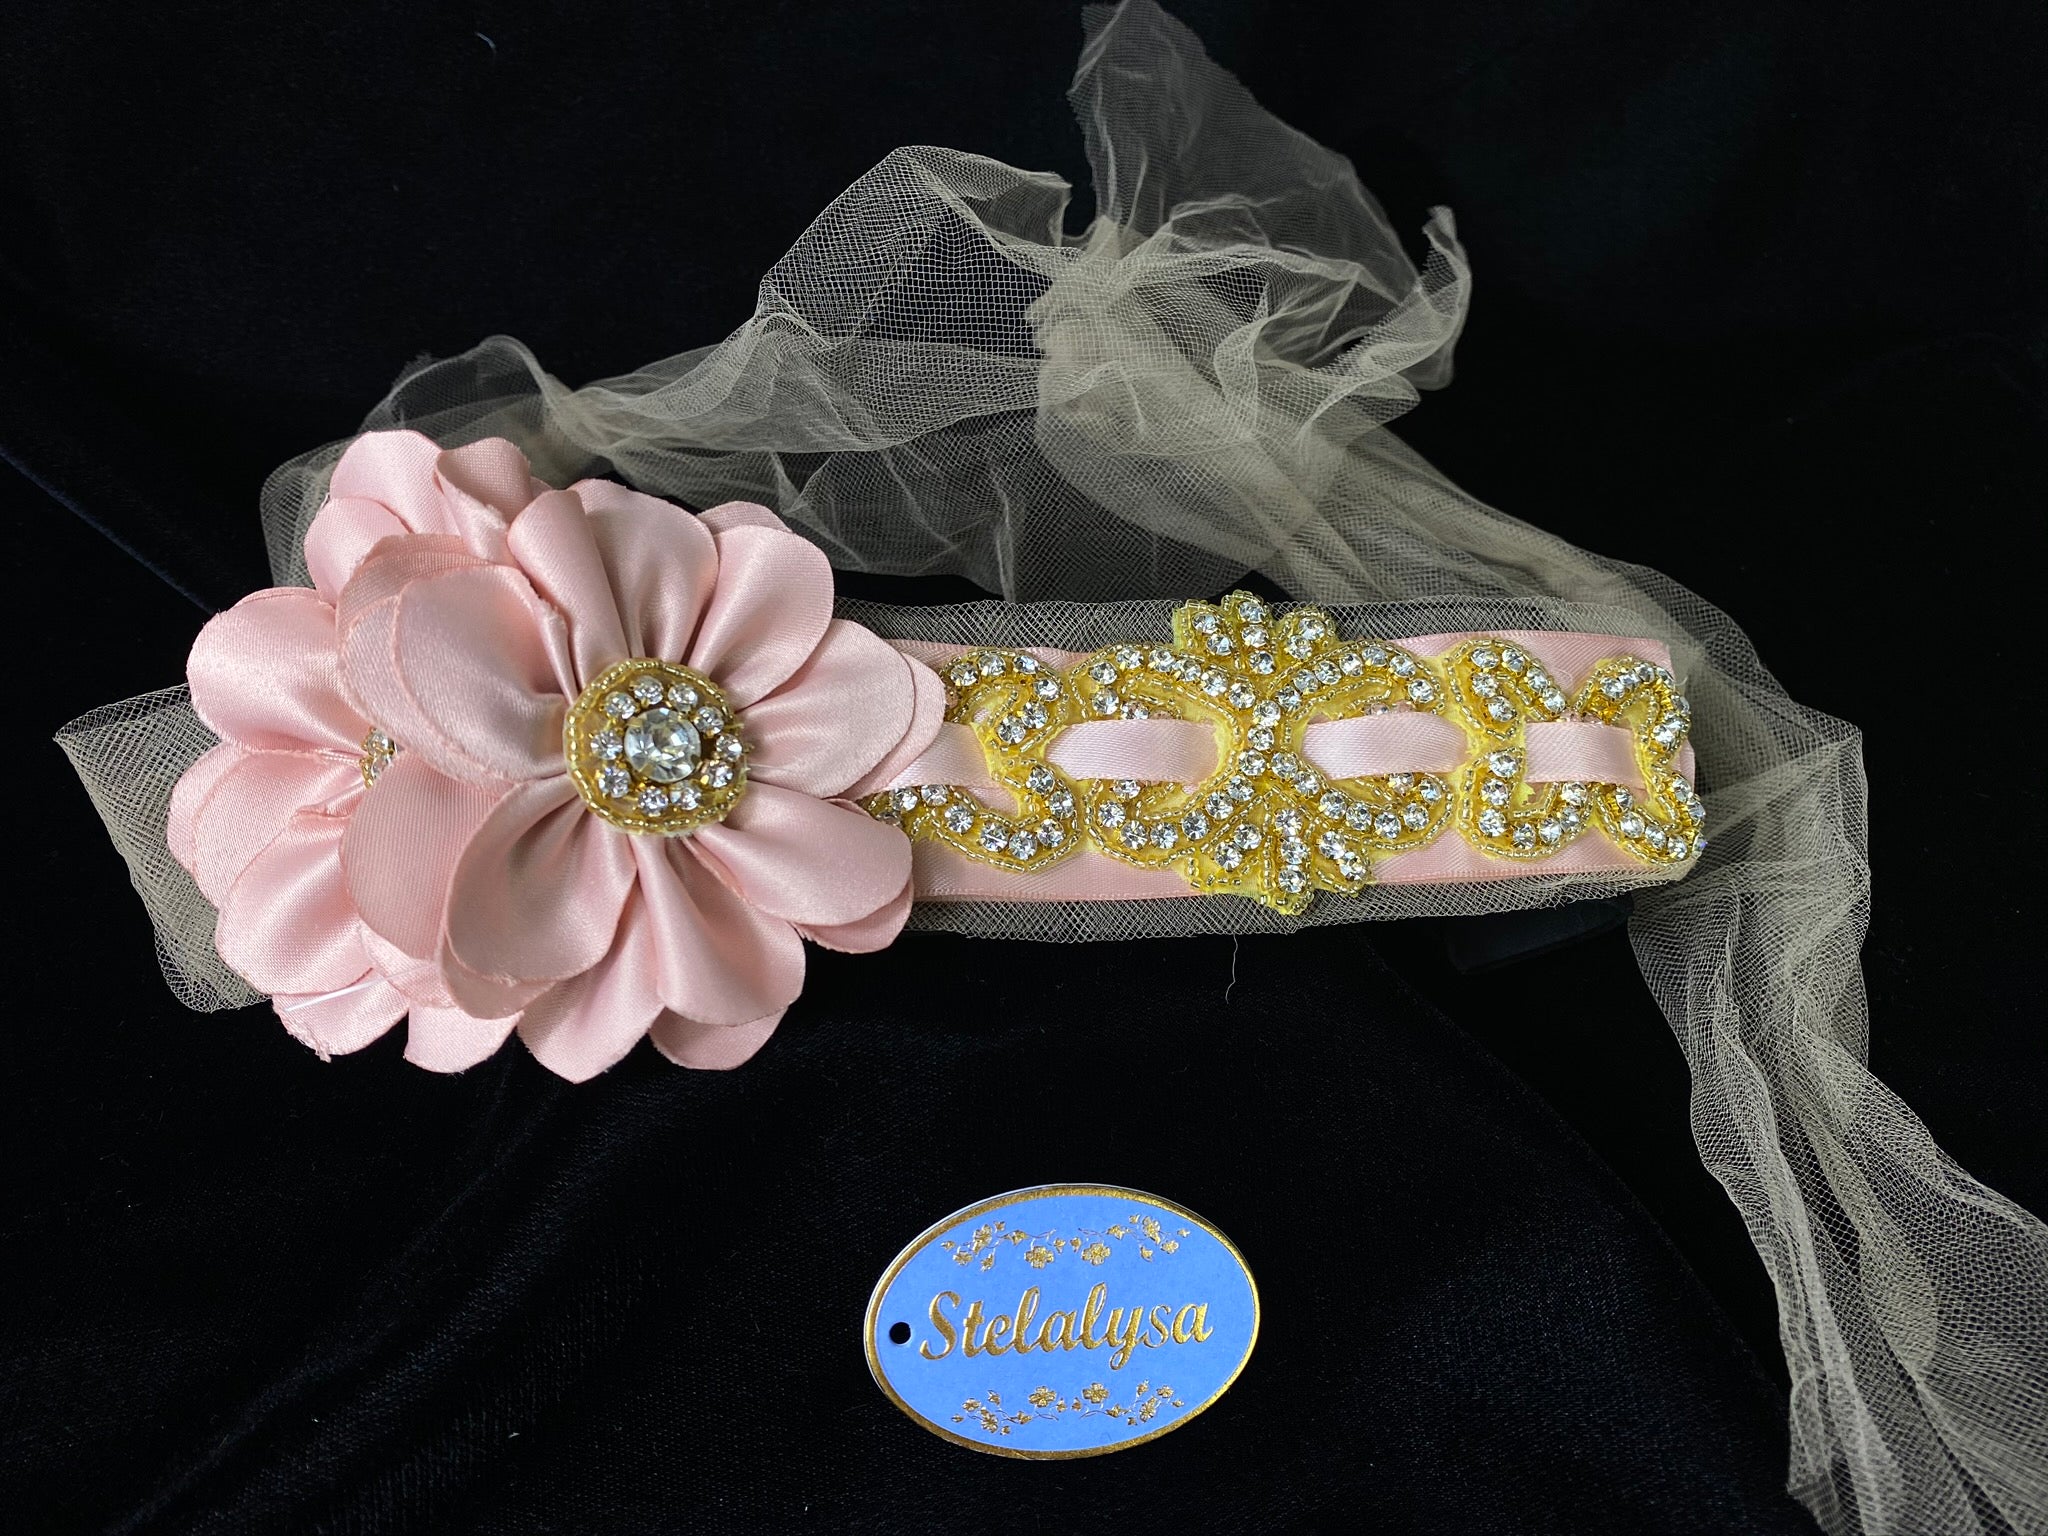 Headband with Strings - Pink Flower with Champagne Tulle Strings  This is an elegant unique handmade and one-of-a-kind headband with a large Pink flowers and long Pink tulle strings attached.  The large flower is uniquely decorated with rhinestones and gold beads.  The headband is made of soft pink satin and gold sequins and rhinestones. 